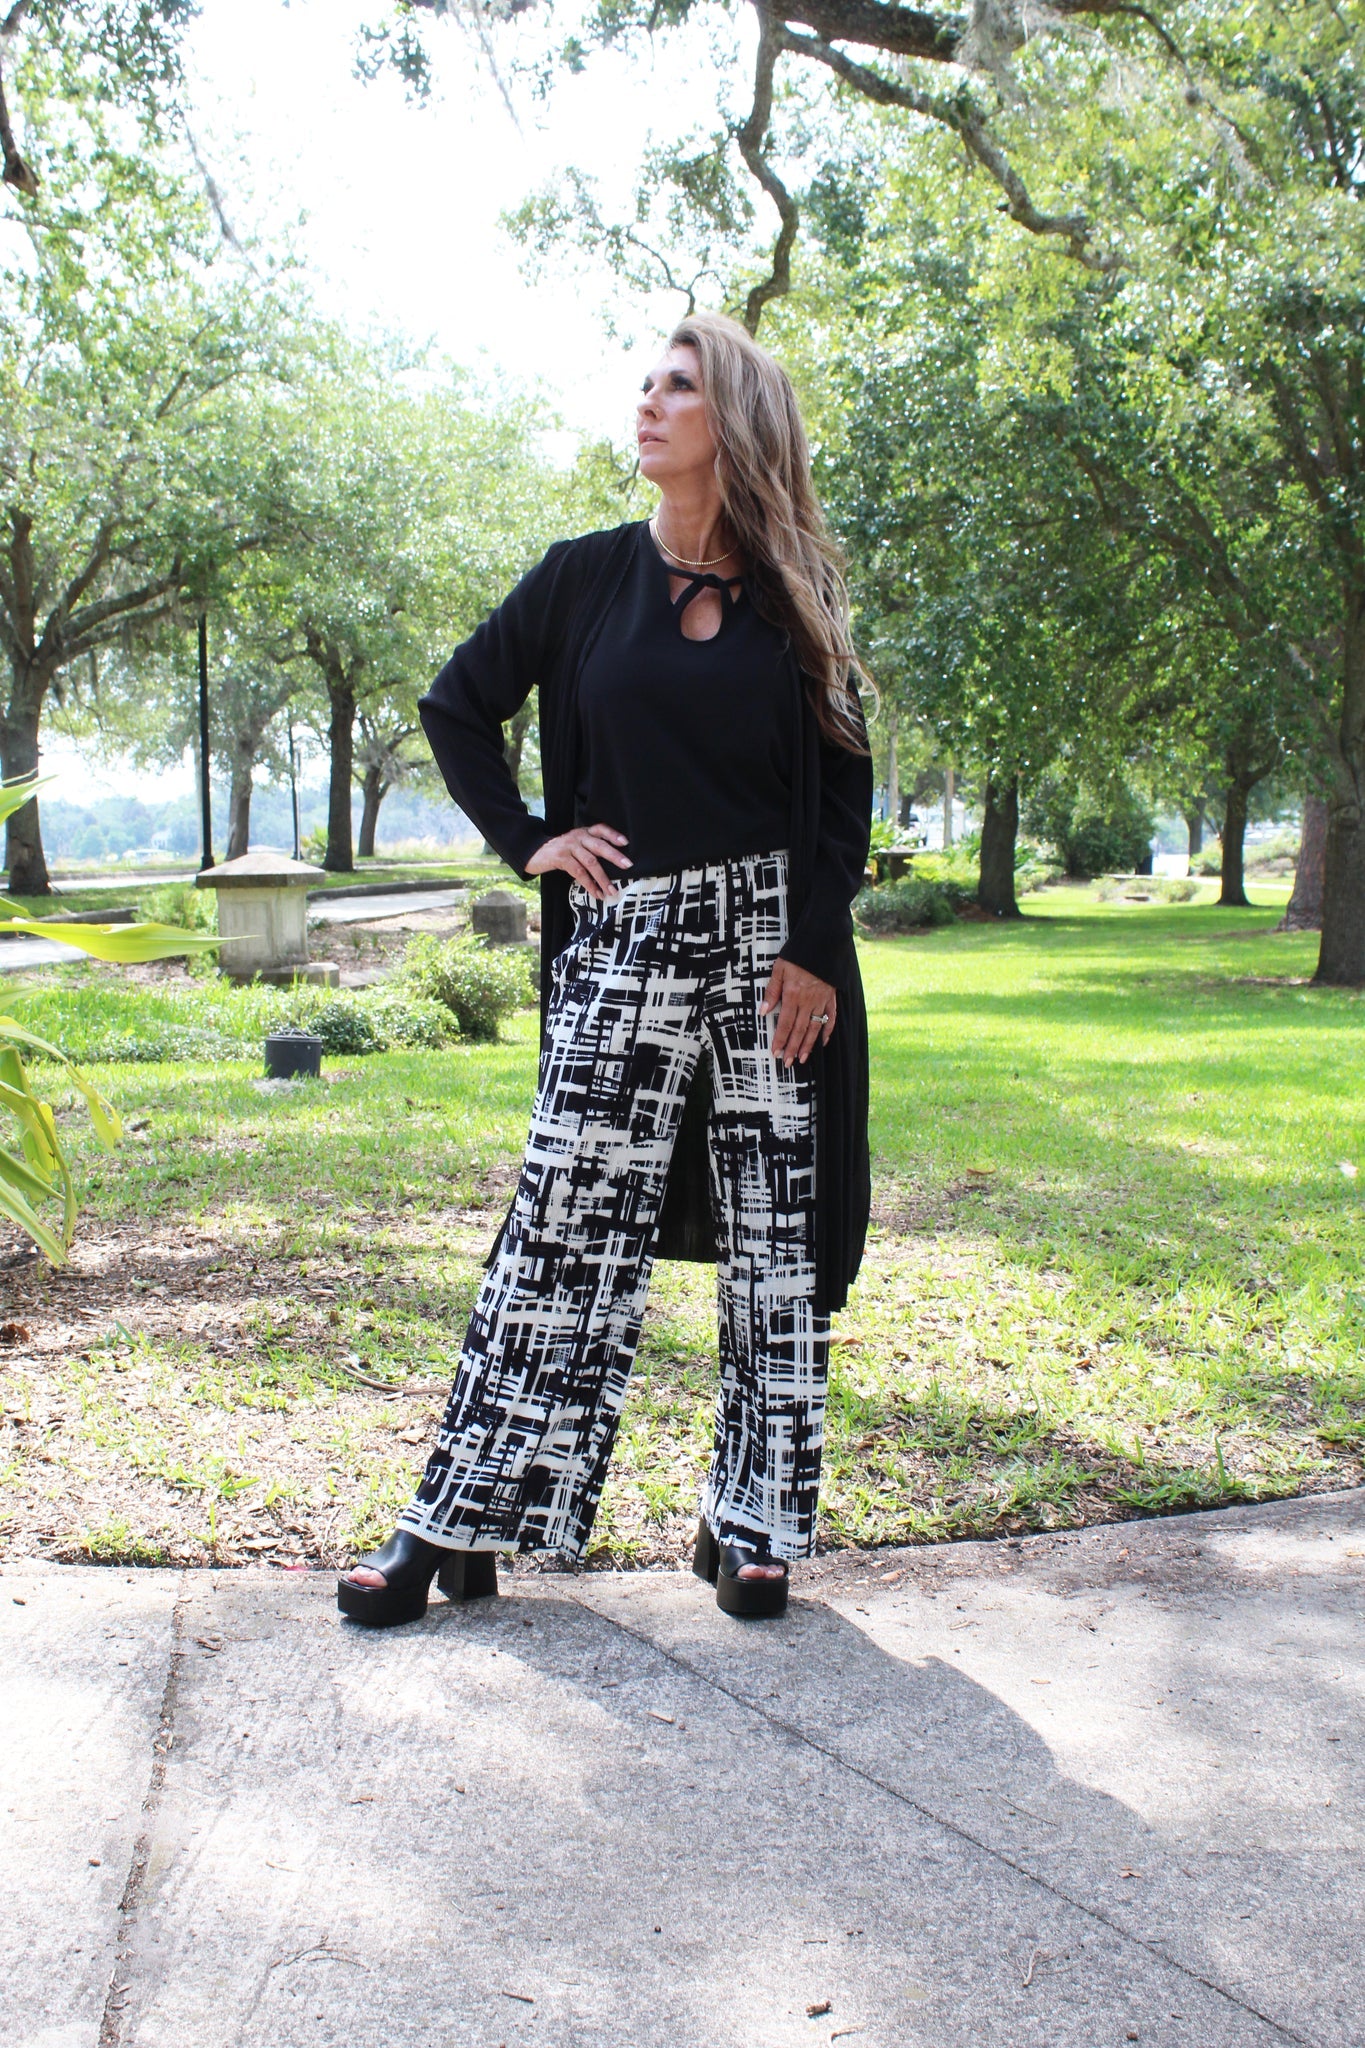 Model wearing the Ribbed Flare Pants in Black/White with black top and long cardigan standing in the park.